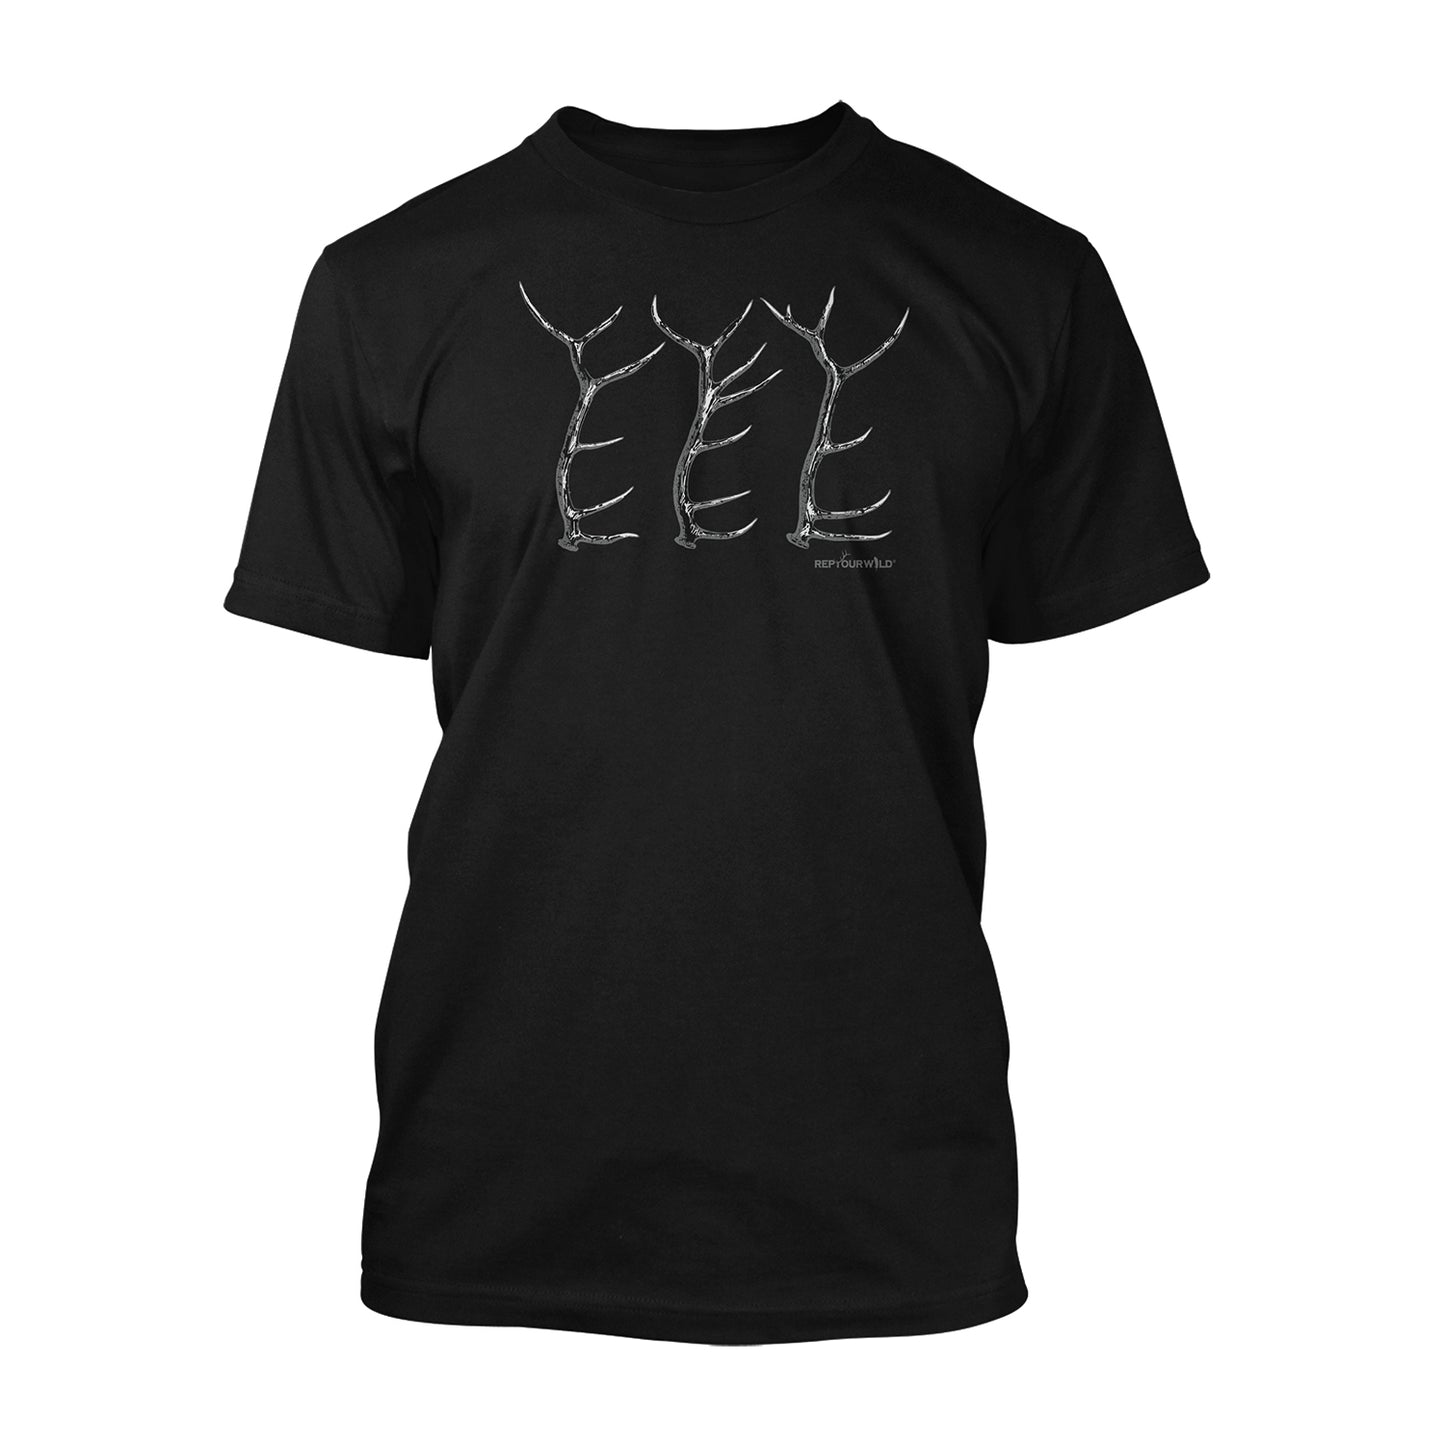 black short sleeved tee shirt with 3 antlers and reads repyourwild